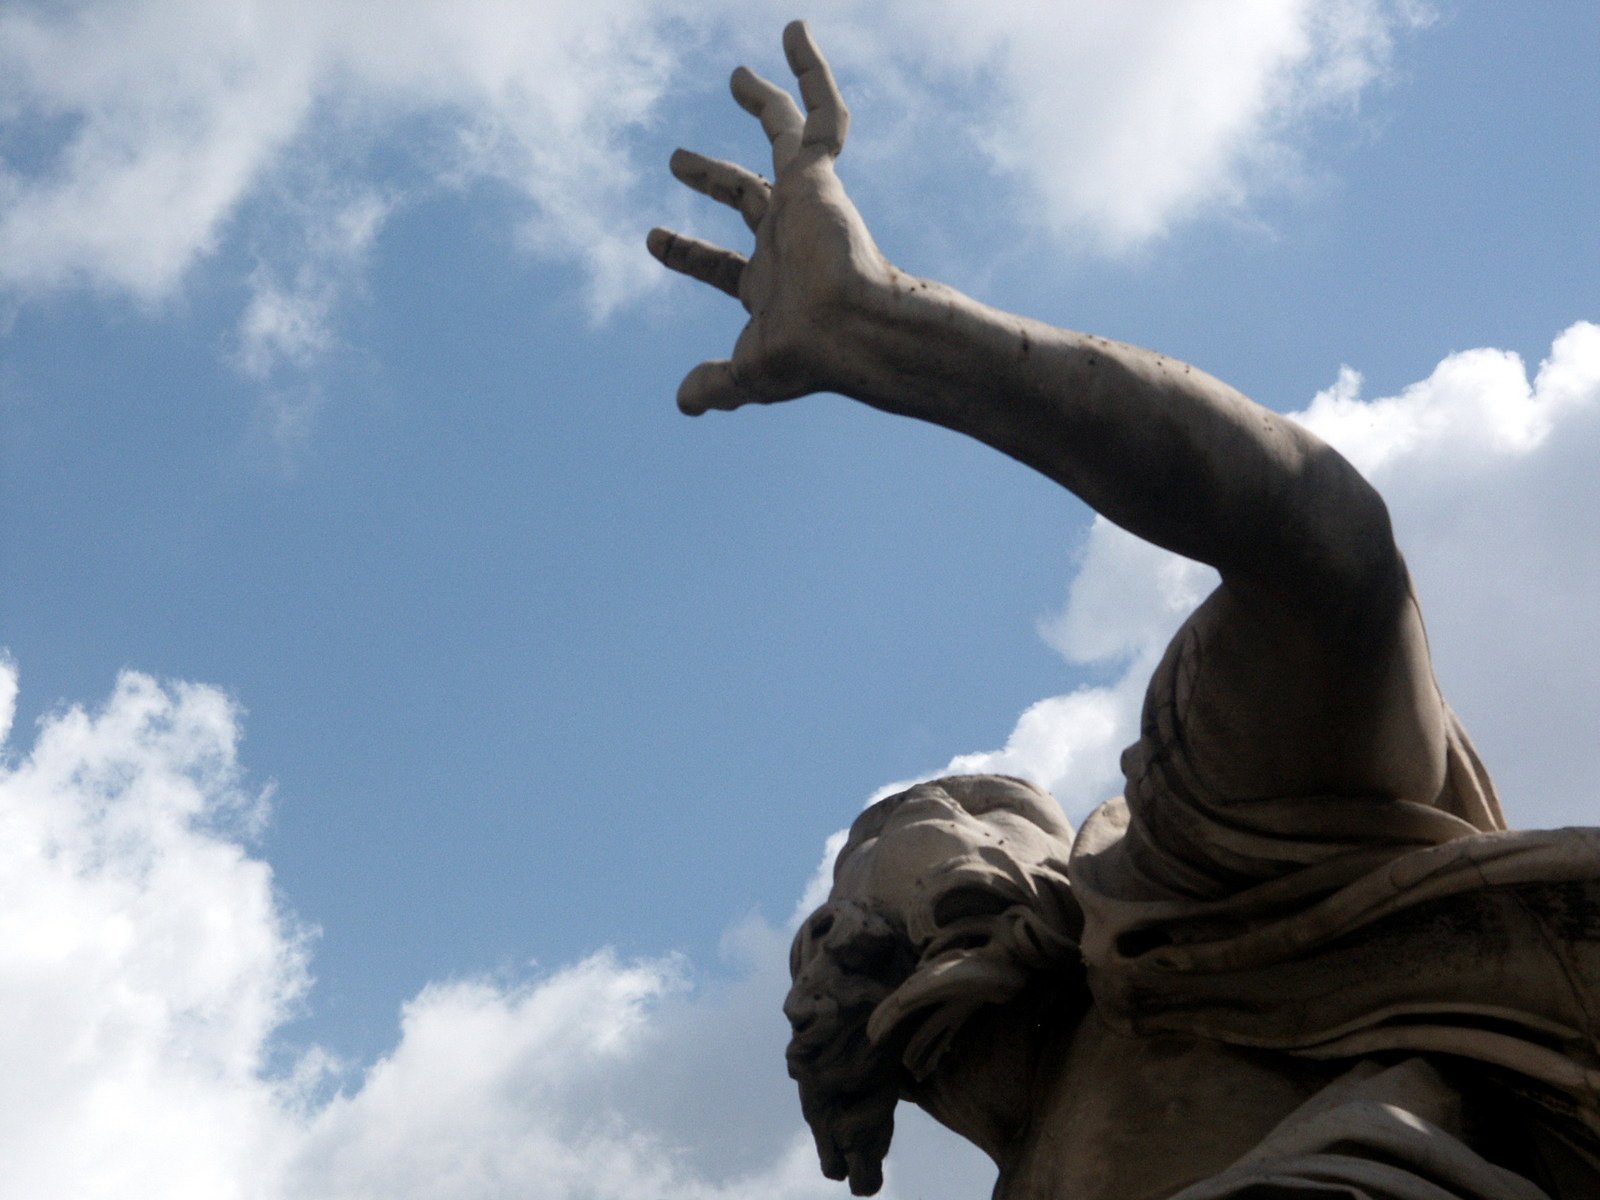 a statue of a hand reaching to grab soing